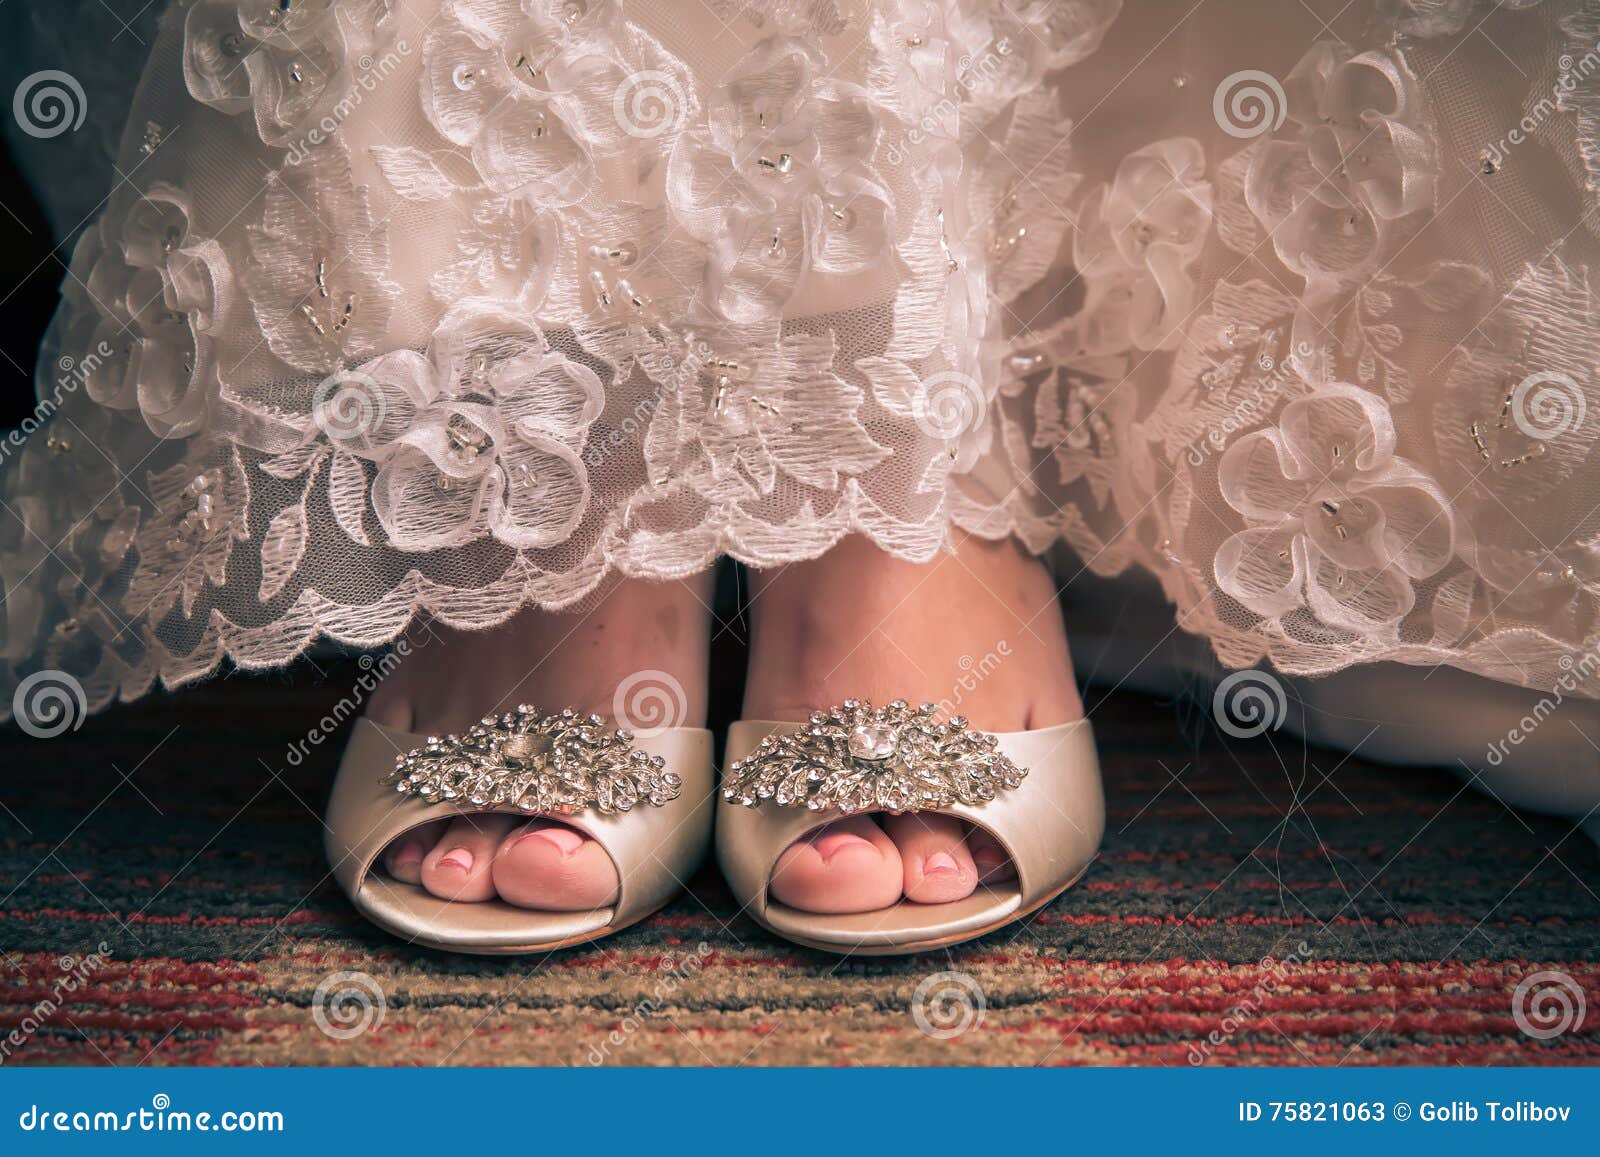 Bride on Foot Mat with Shoes Stock Image - Image of family, nature ...